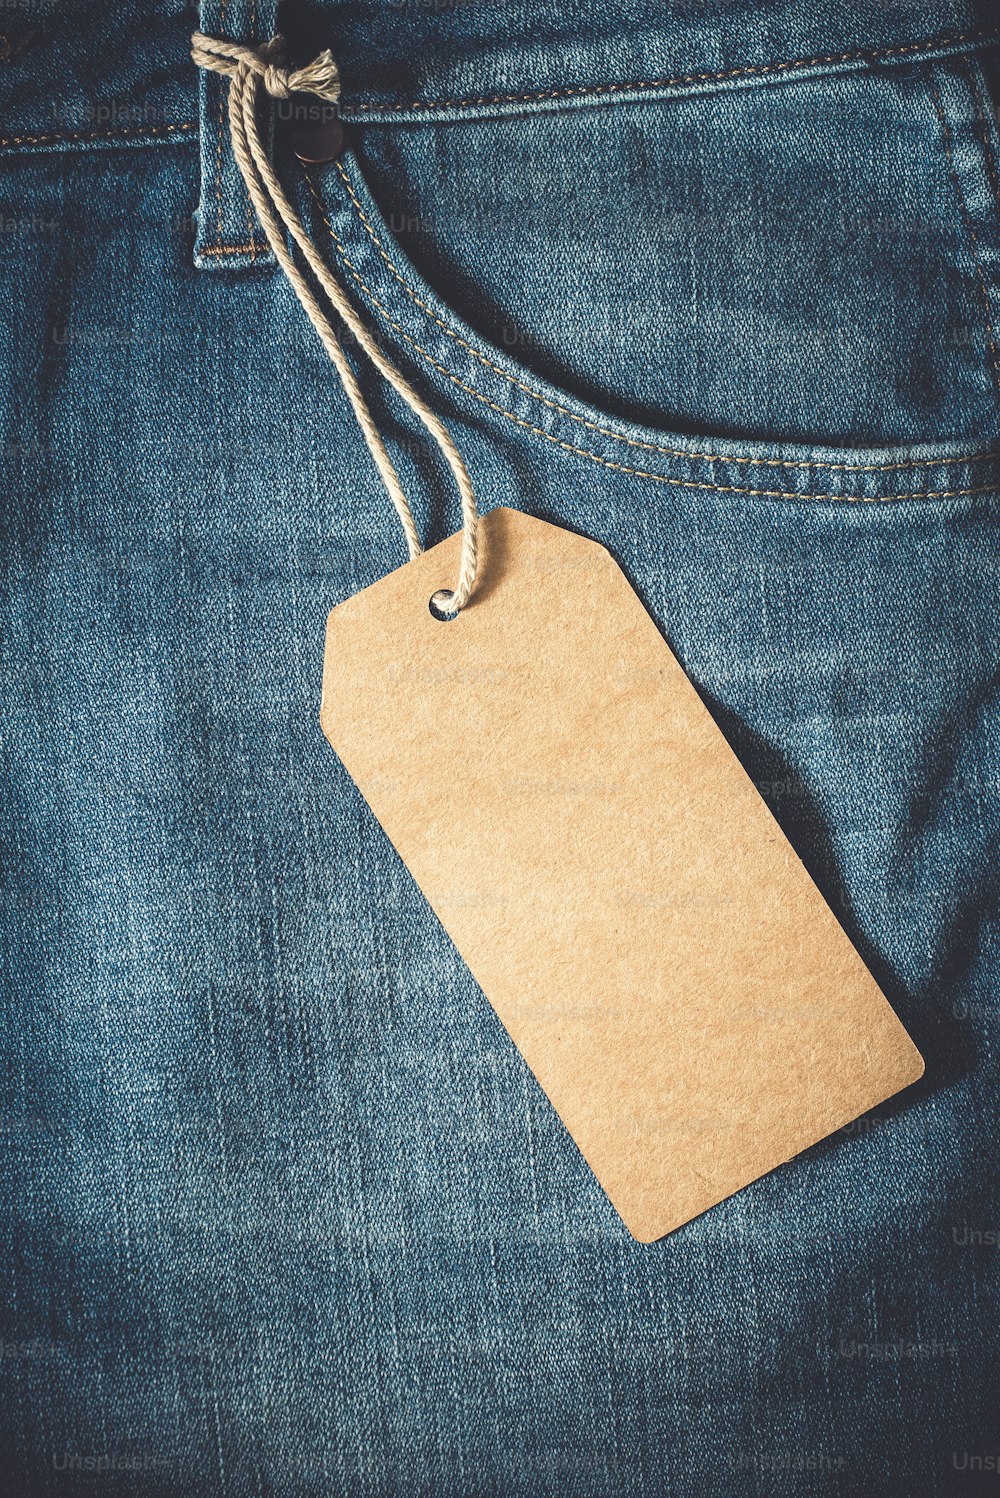 Empty brown paper tag of jean. vintage color effect style.